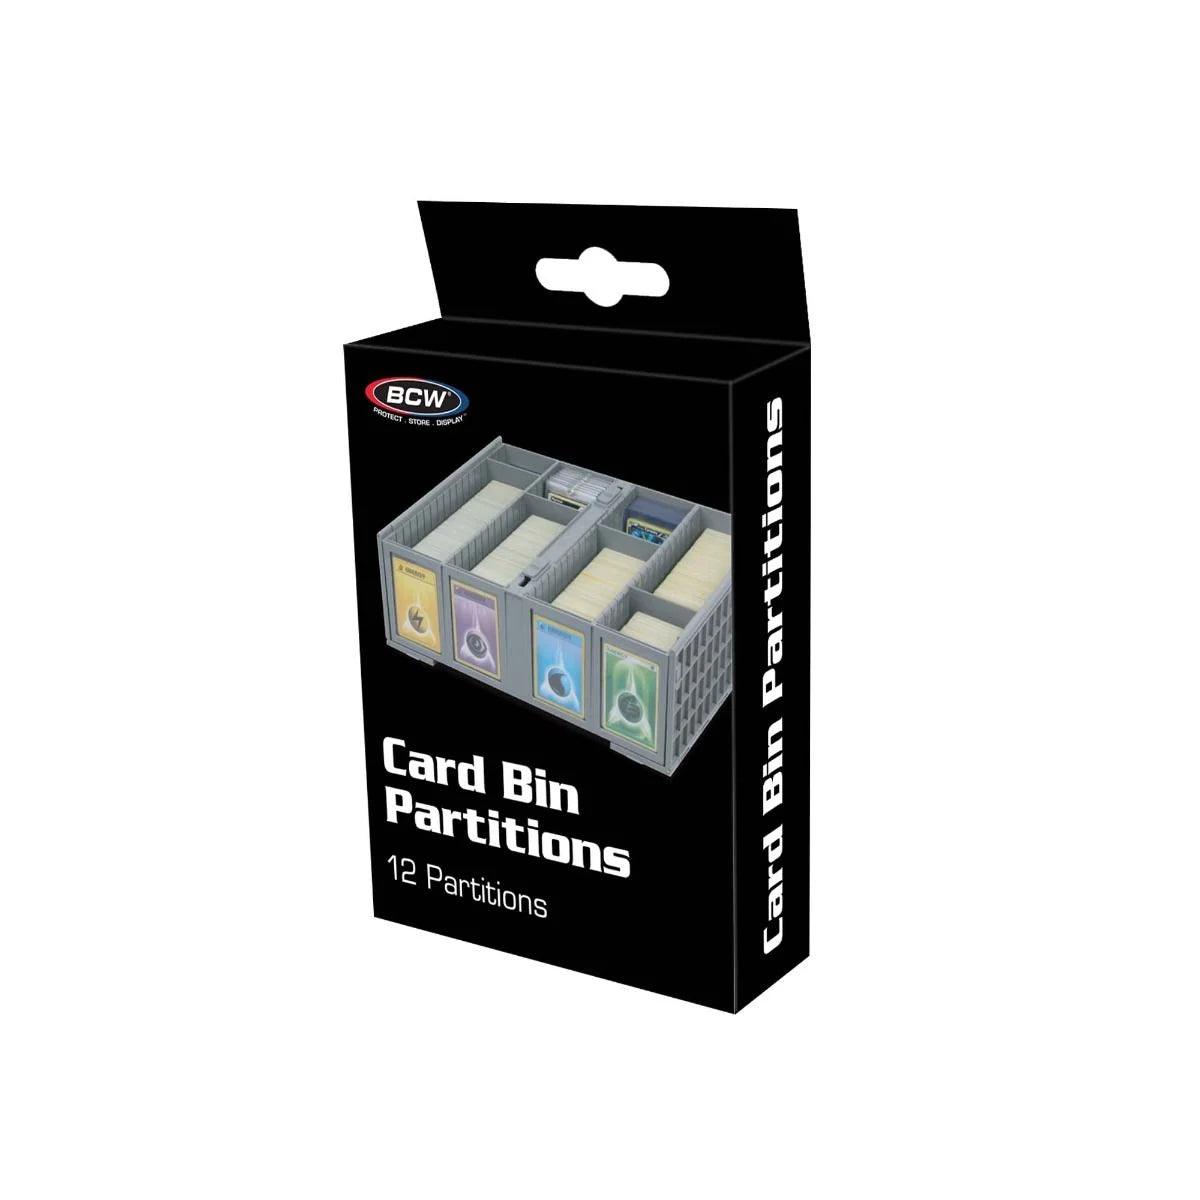 BCW - Plastic Storage Card Bin Partitions (Pack of 12) - Gray Color - Hobby Champion Inc